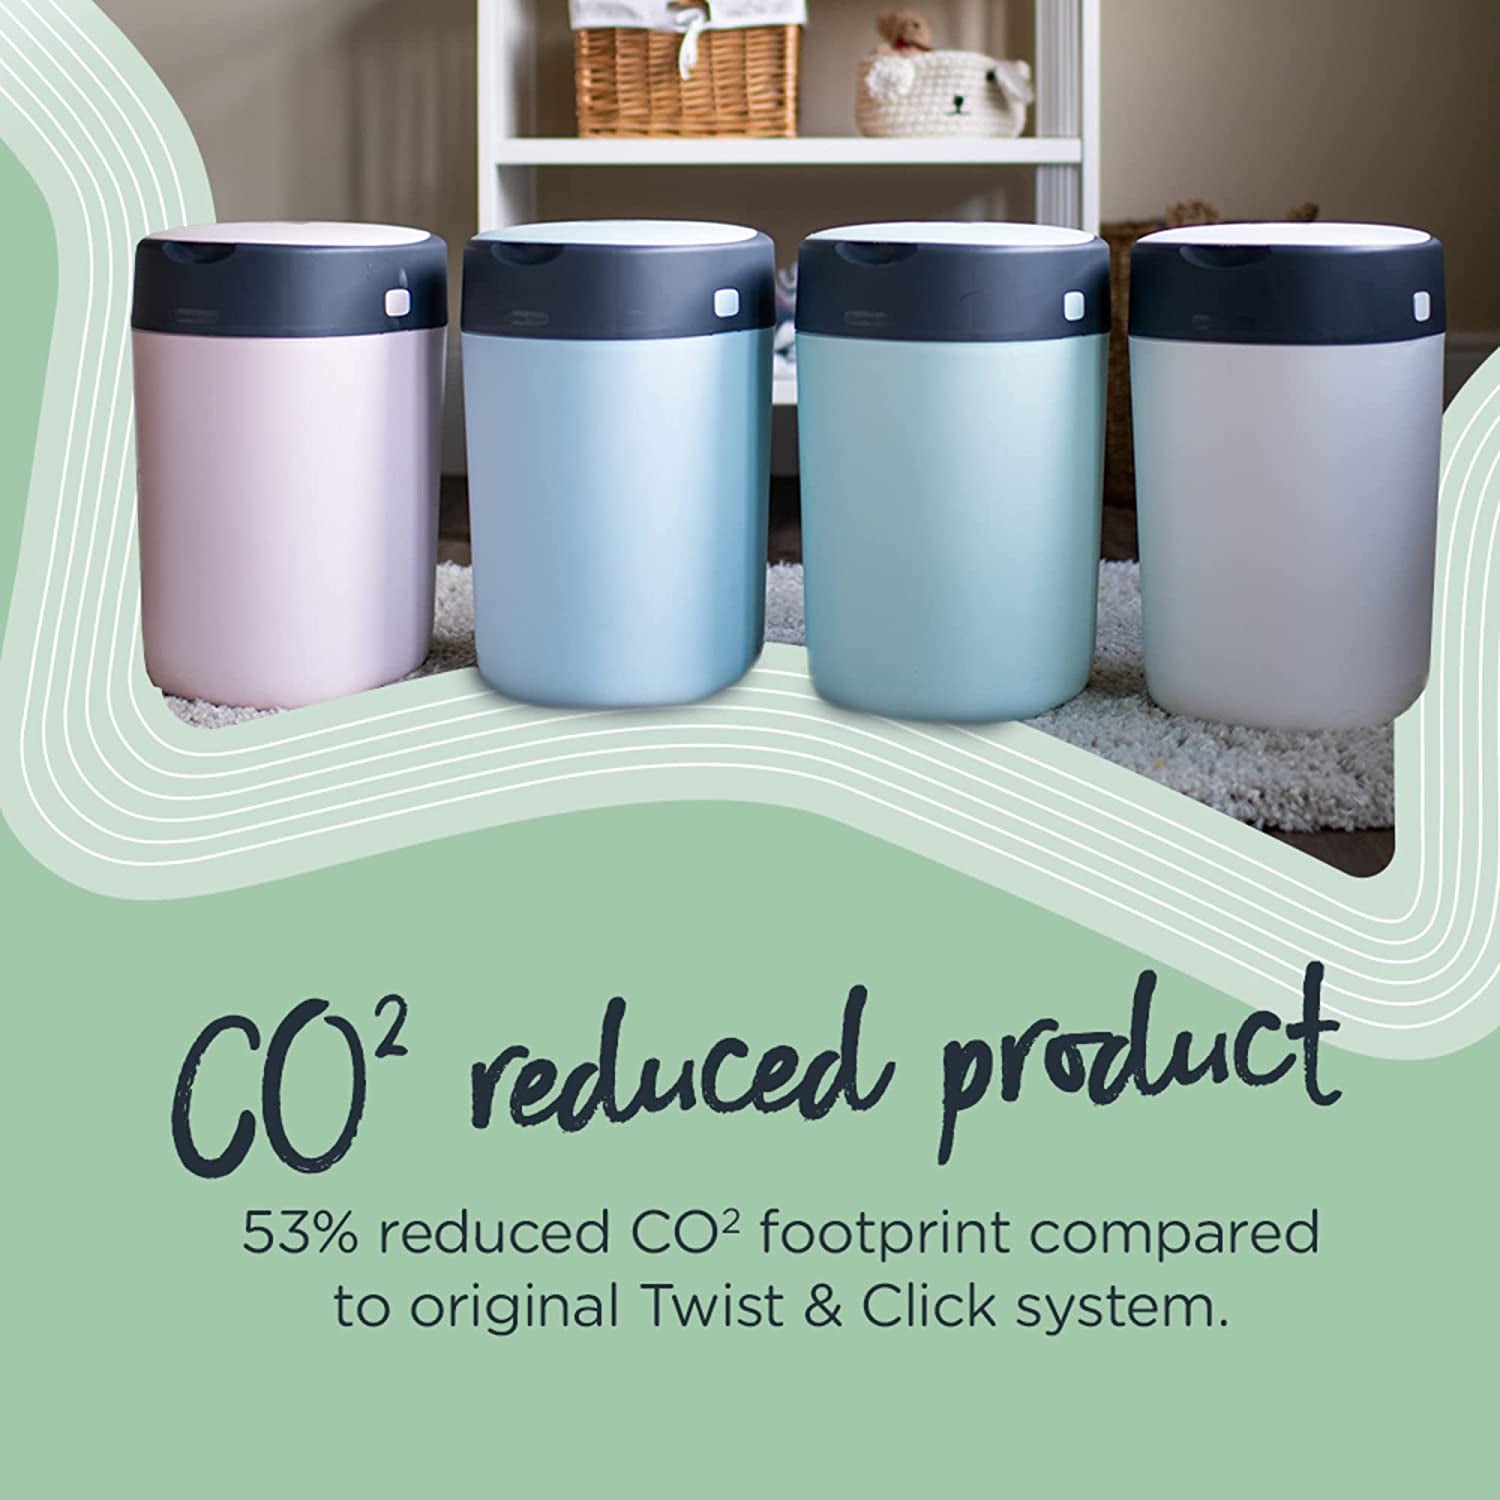 Plastic Twist and Click Advanced Nappy Bin Starter Set, Eco-Friendlier System with 12X Refill Cassettes with Sustainably Sourced Antibacterial GREENFILM, 5 Kilograms, White